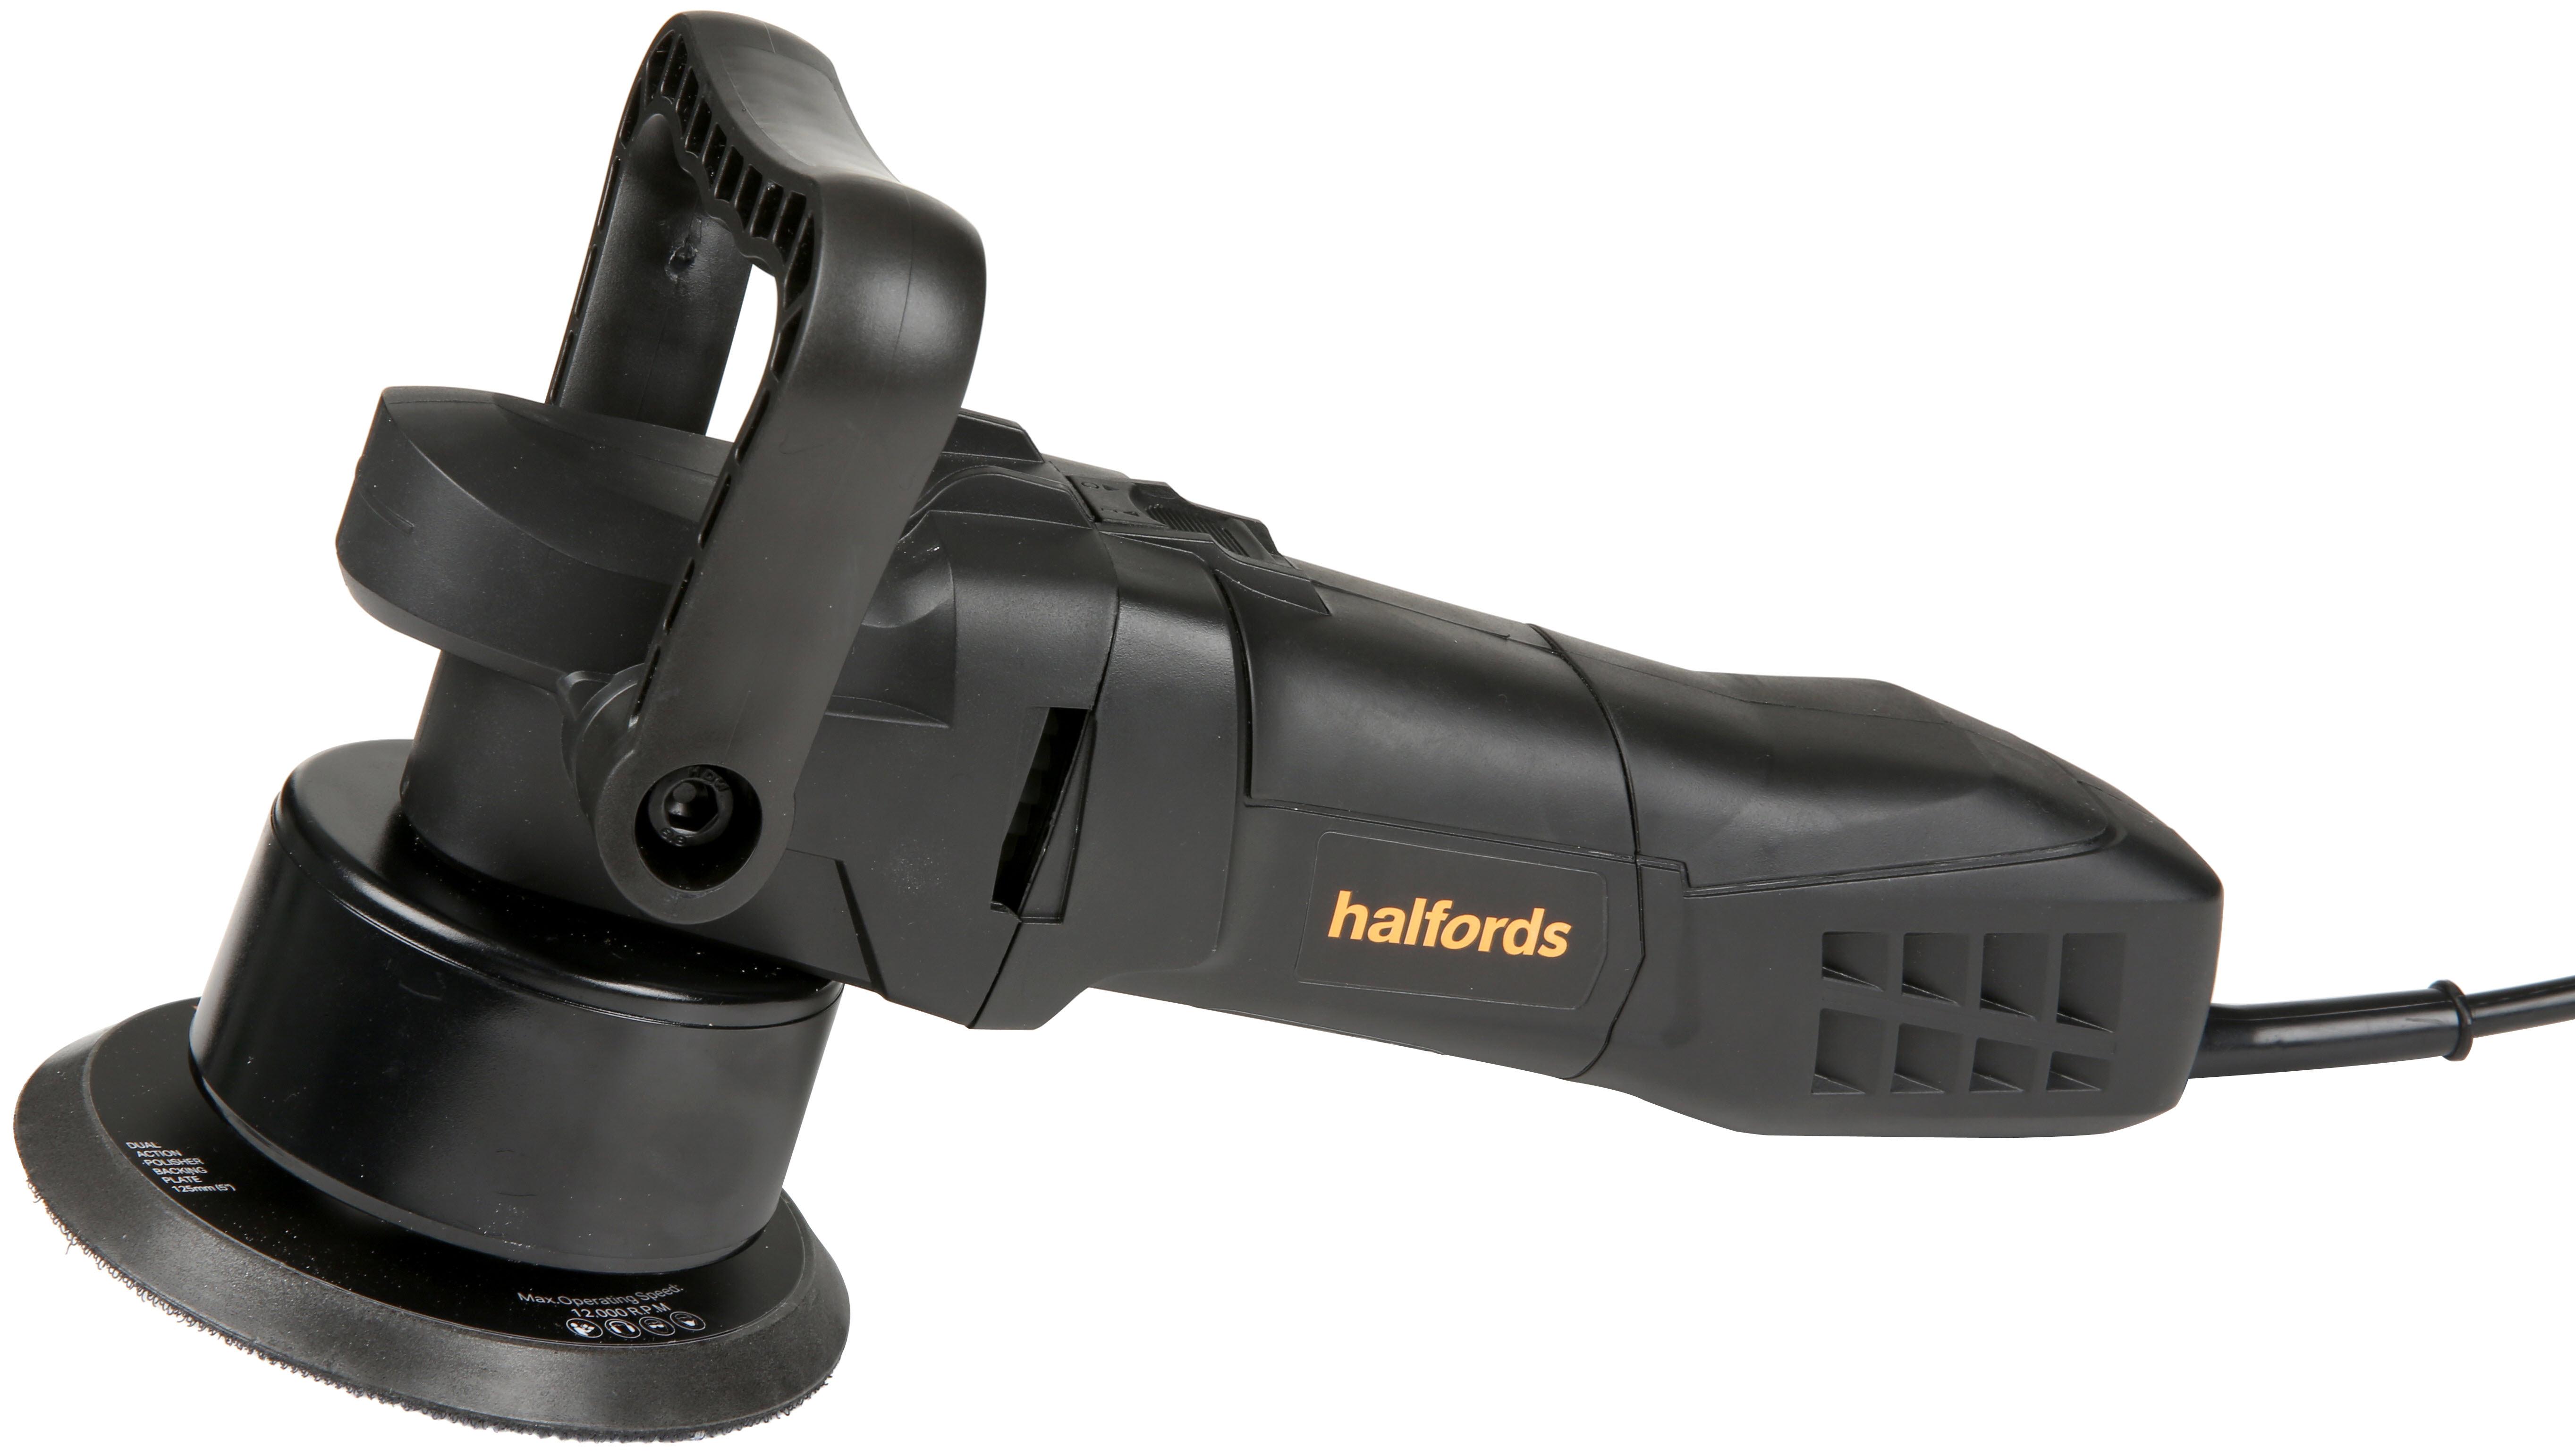 Halfords Dual Action Car Polisher